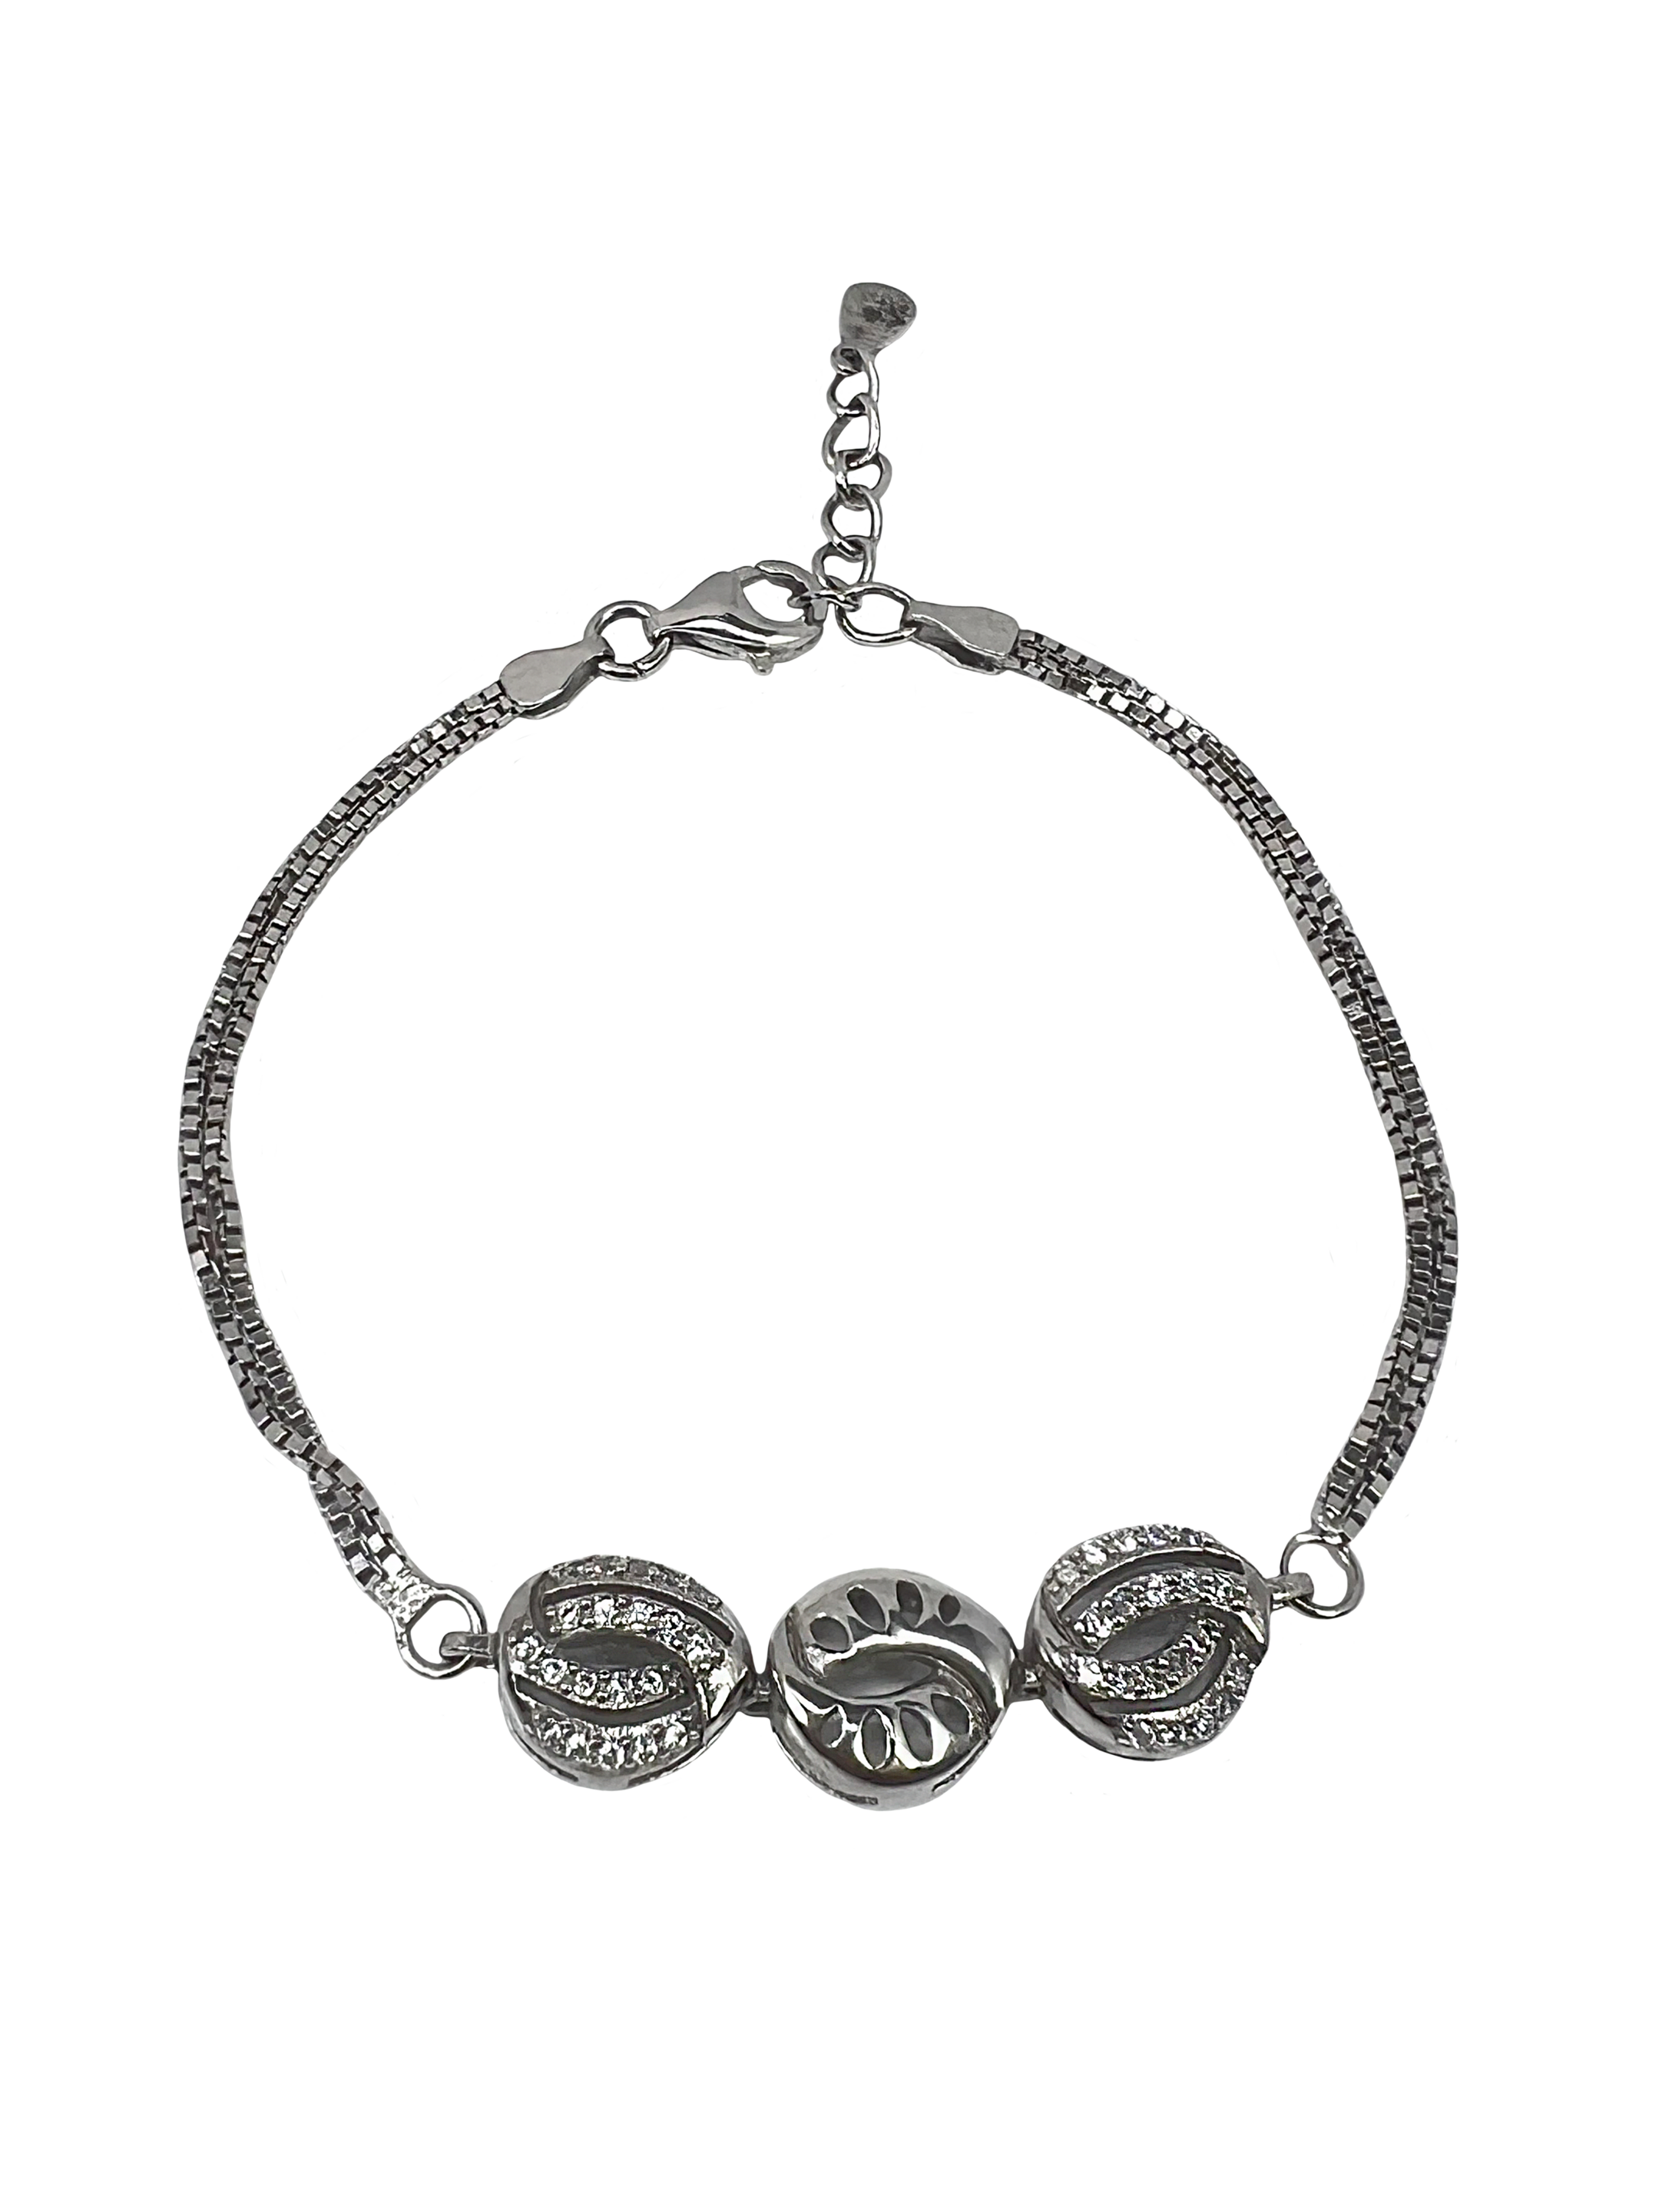 Silver patterned bracelet with crystals